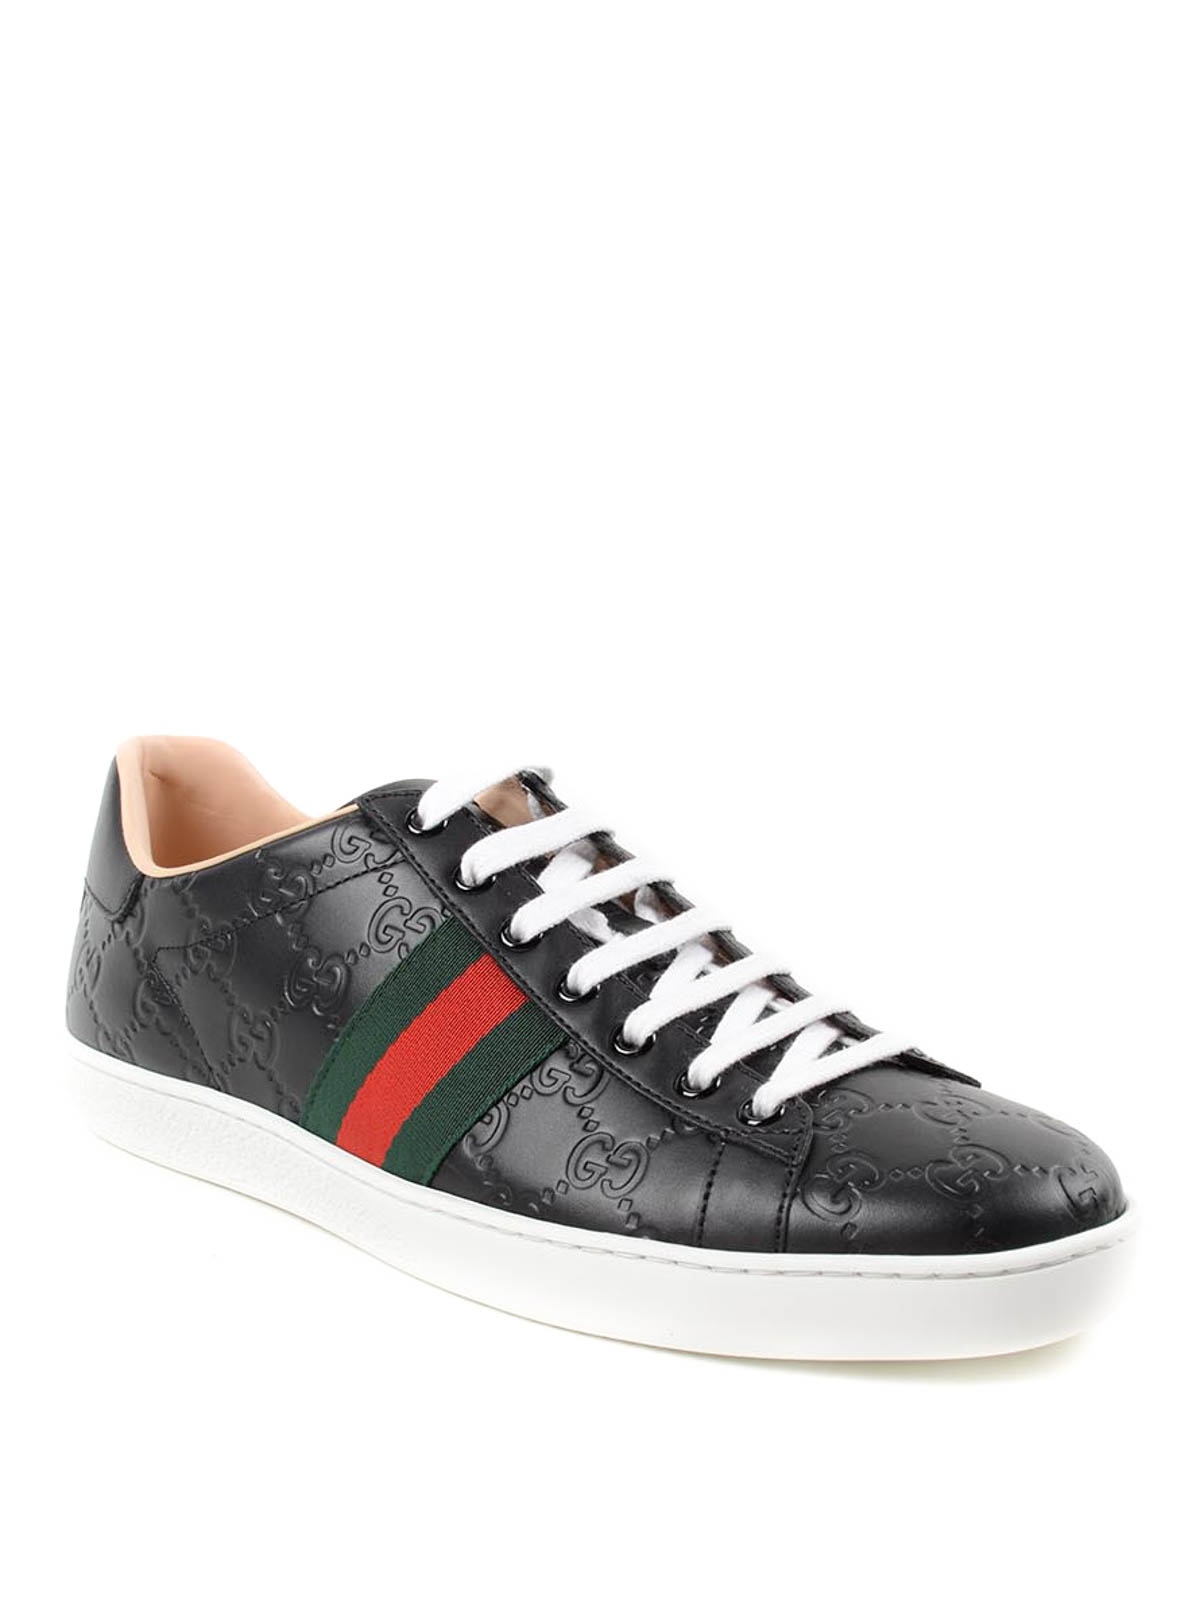 GG leather sneakers by Gucci - trainers | Shop online at www.paulmartinsmith.com